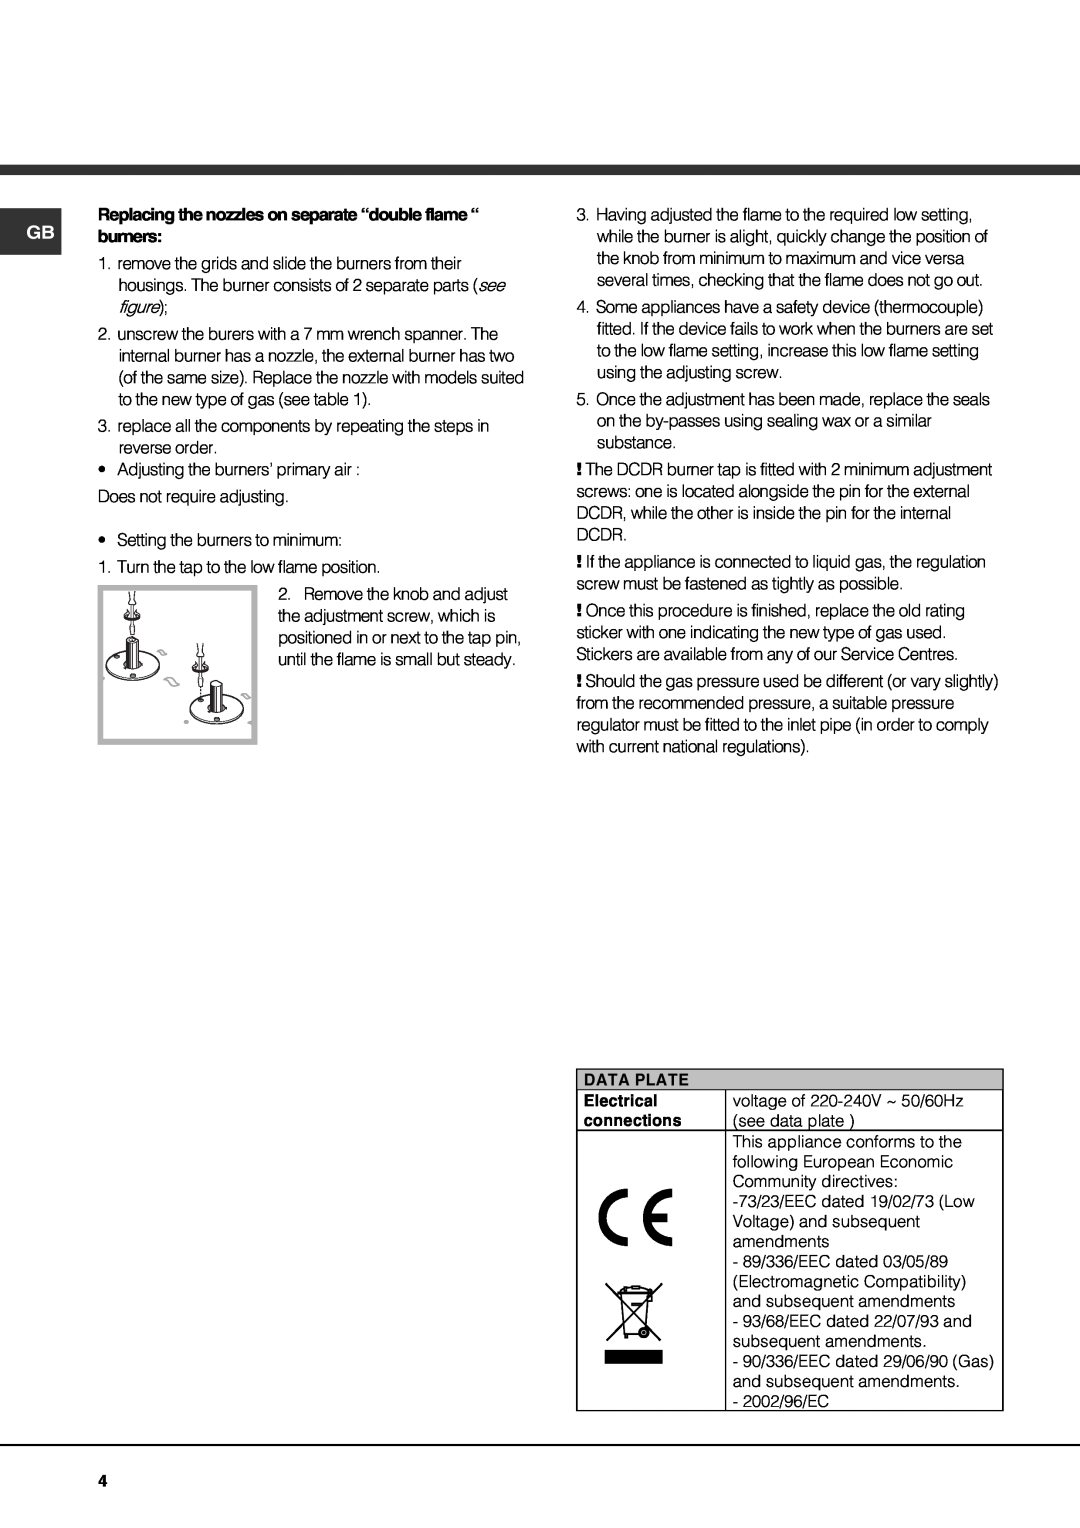 Hotpoint GE750DX operating instructions Setting the burners to minimum 